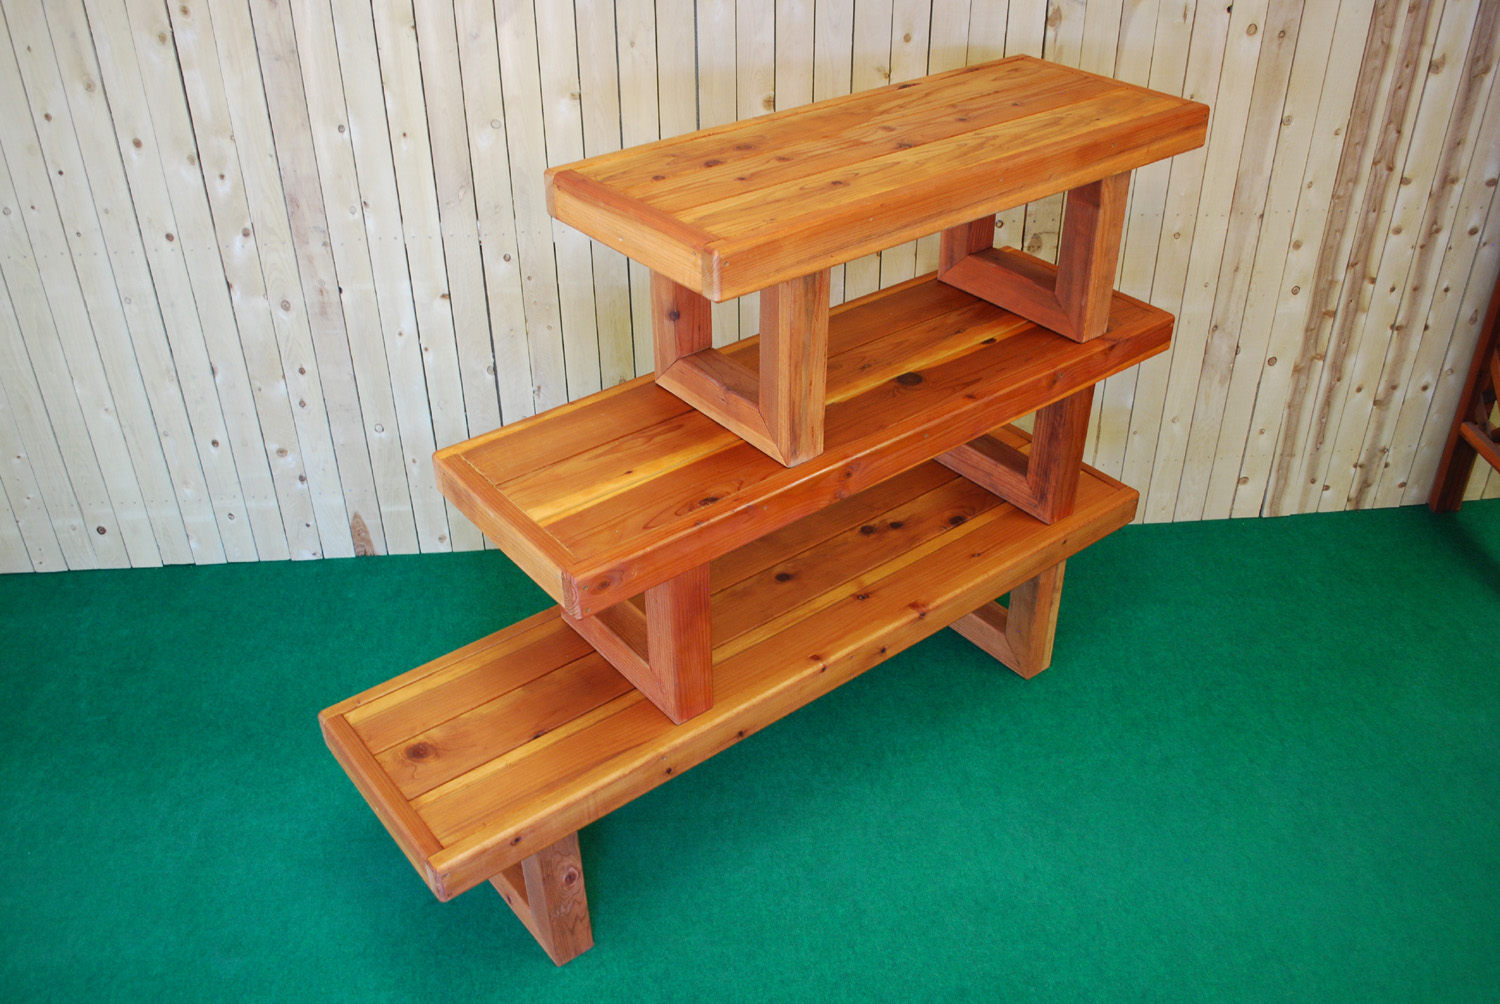 redwood contempo table (all 3 sizes)